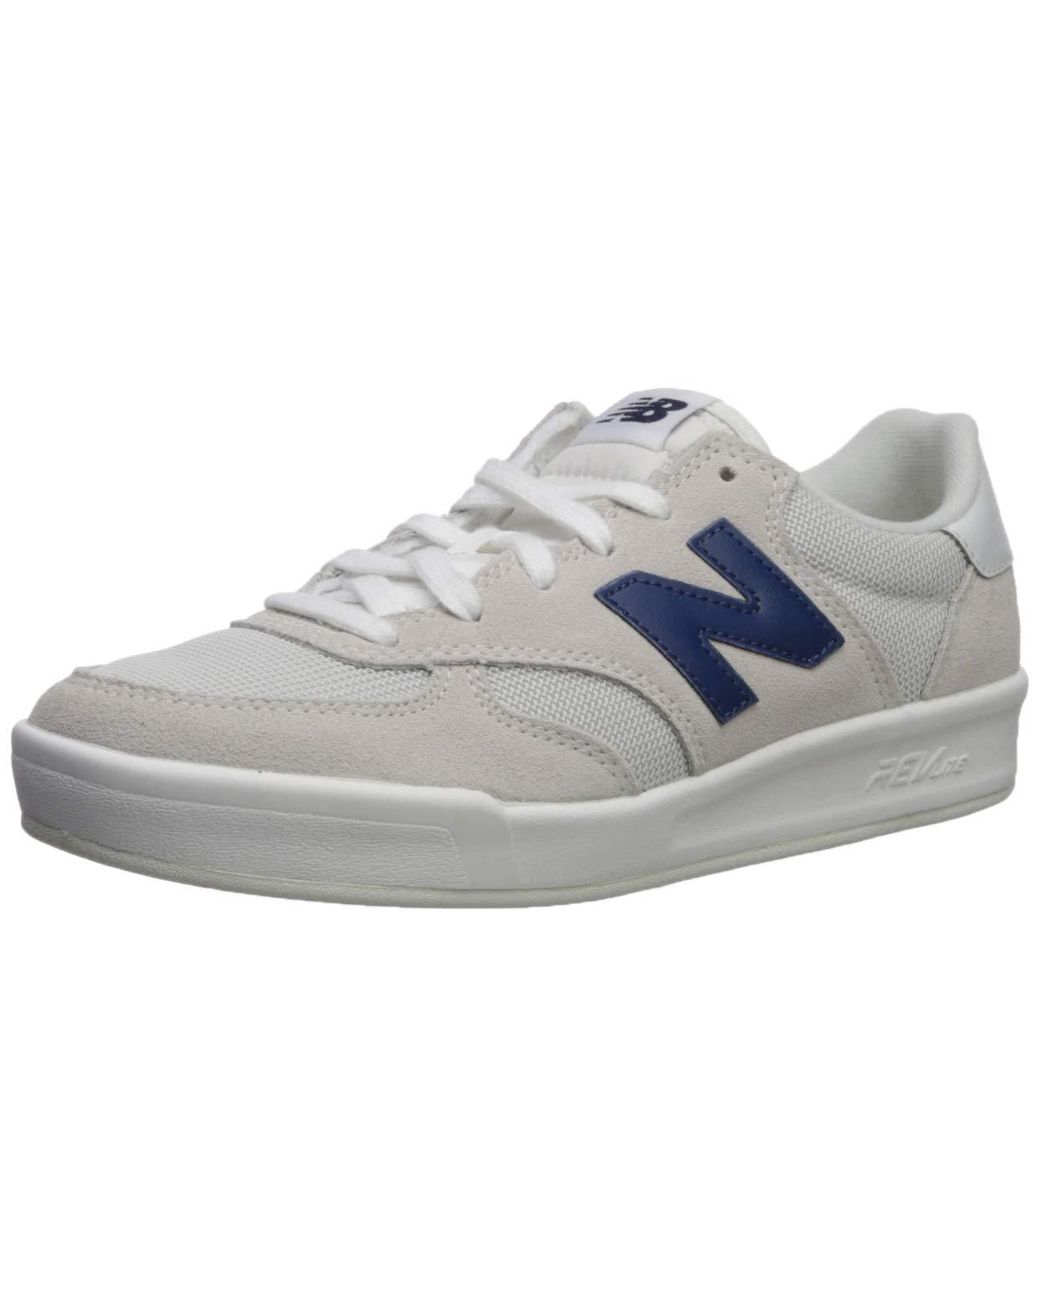 New Balance 300 V1 Court Sneaker in White - Save 20% - Lyst